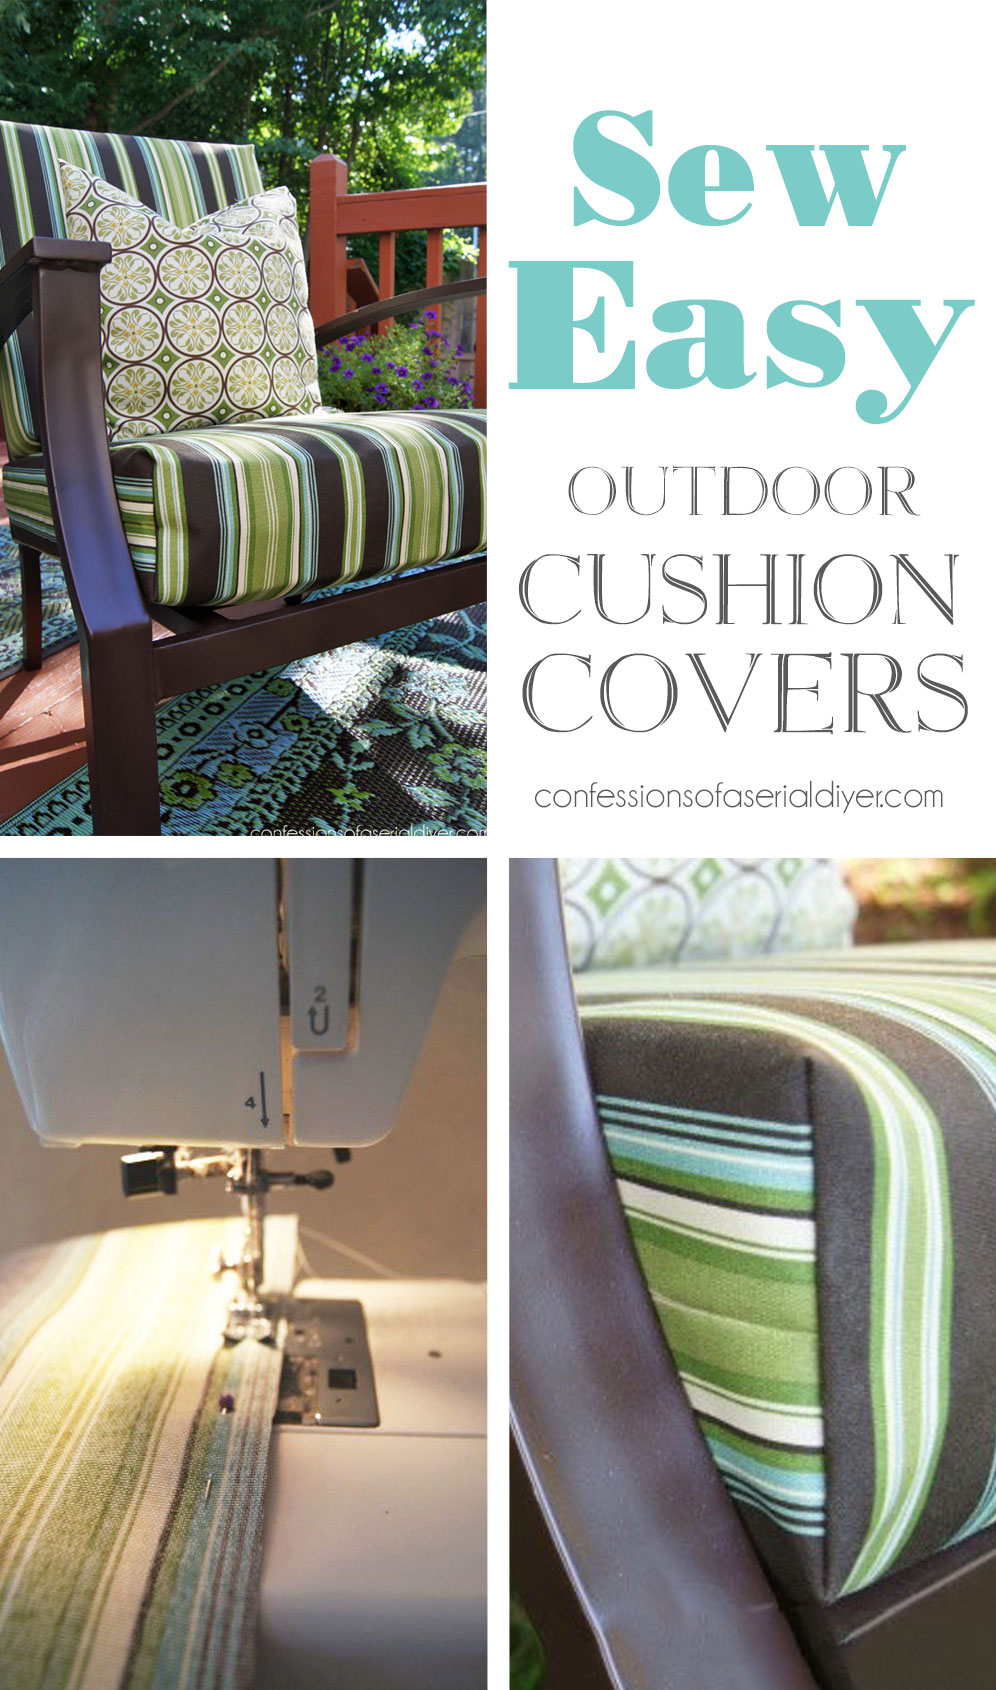 Sew Easy Outdoor Cushion Covers, How To Make Outdoor Cushions Covers